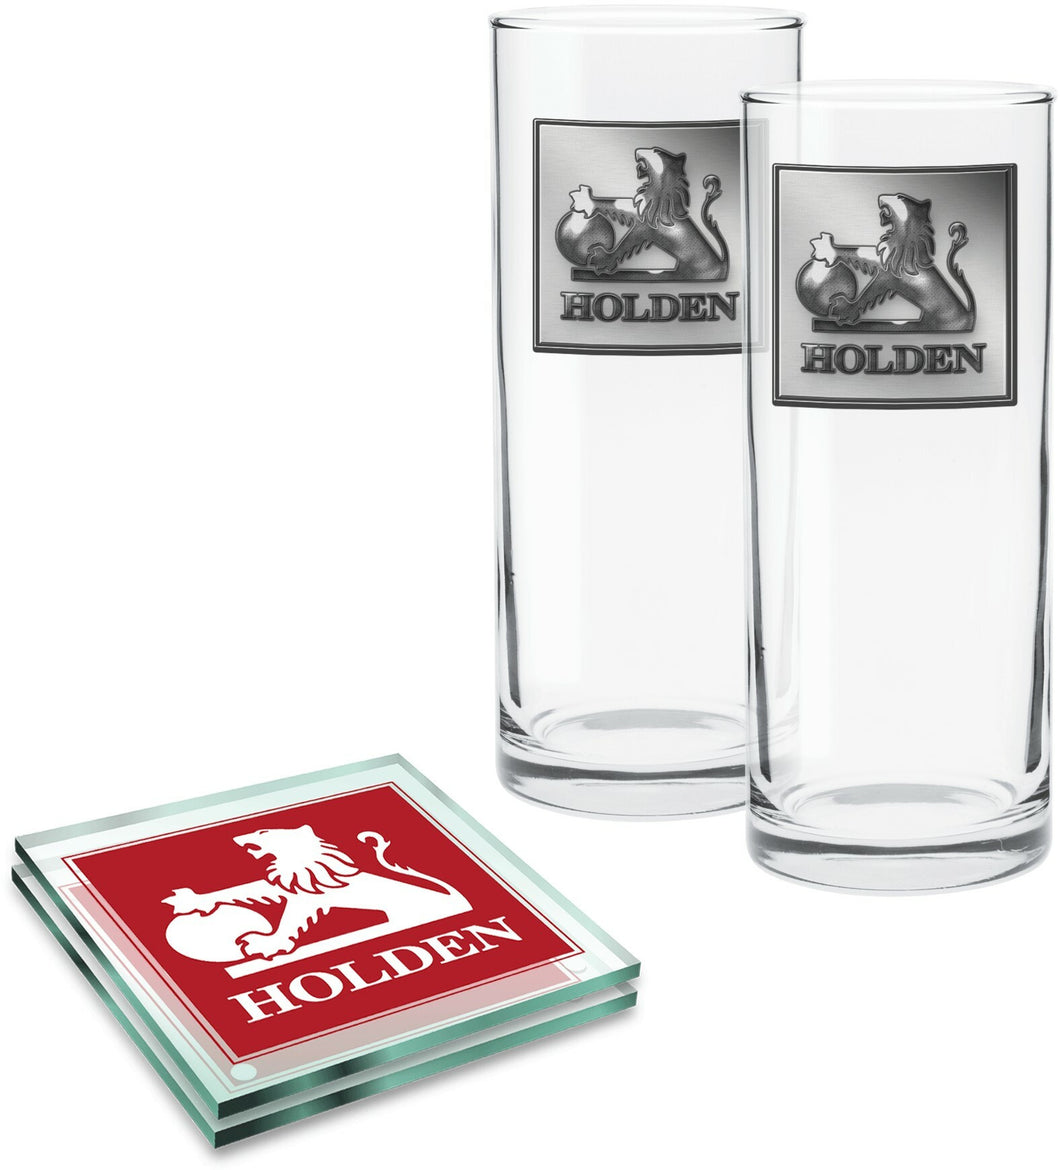 Holden Highball Glasses and Coasters Set of 2